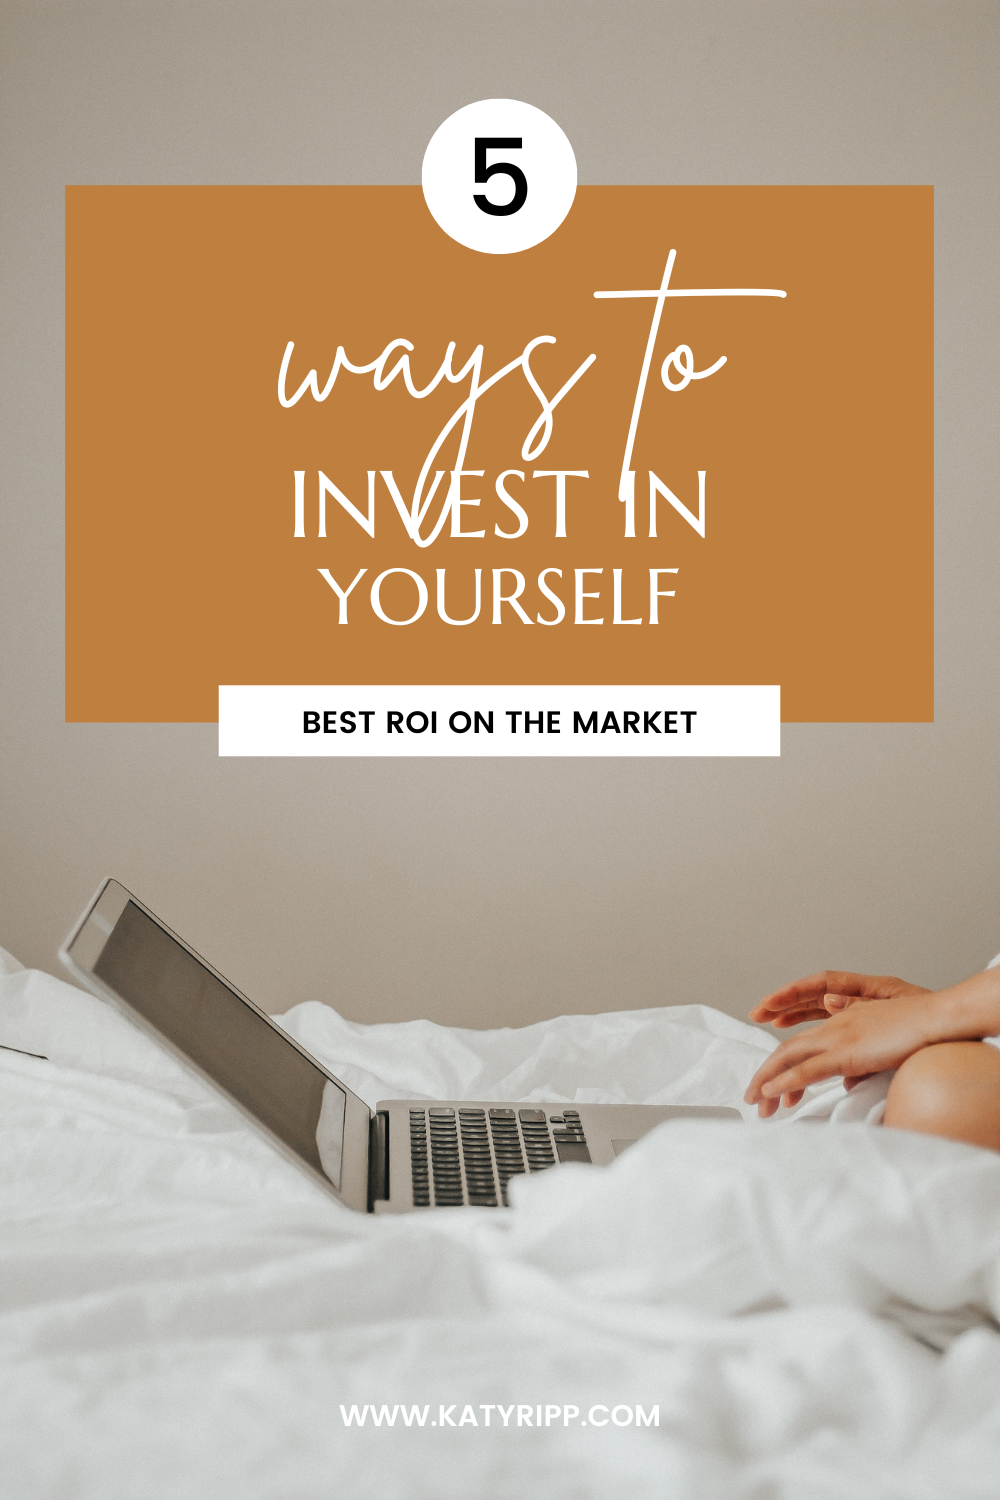 5 Ways to Invest in Yourself